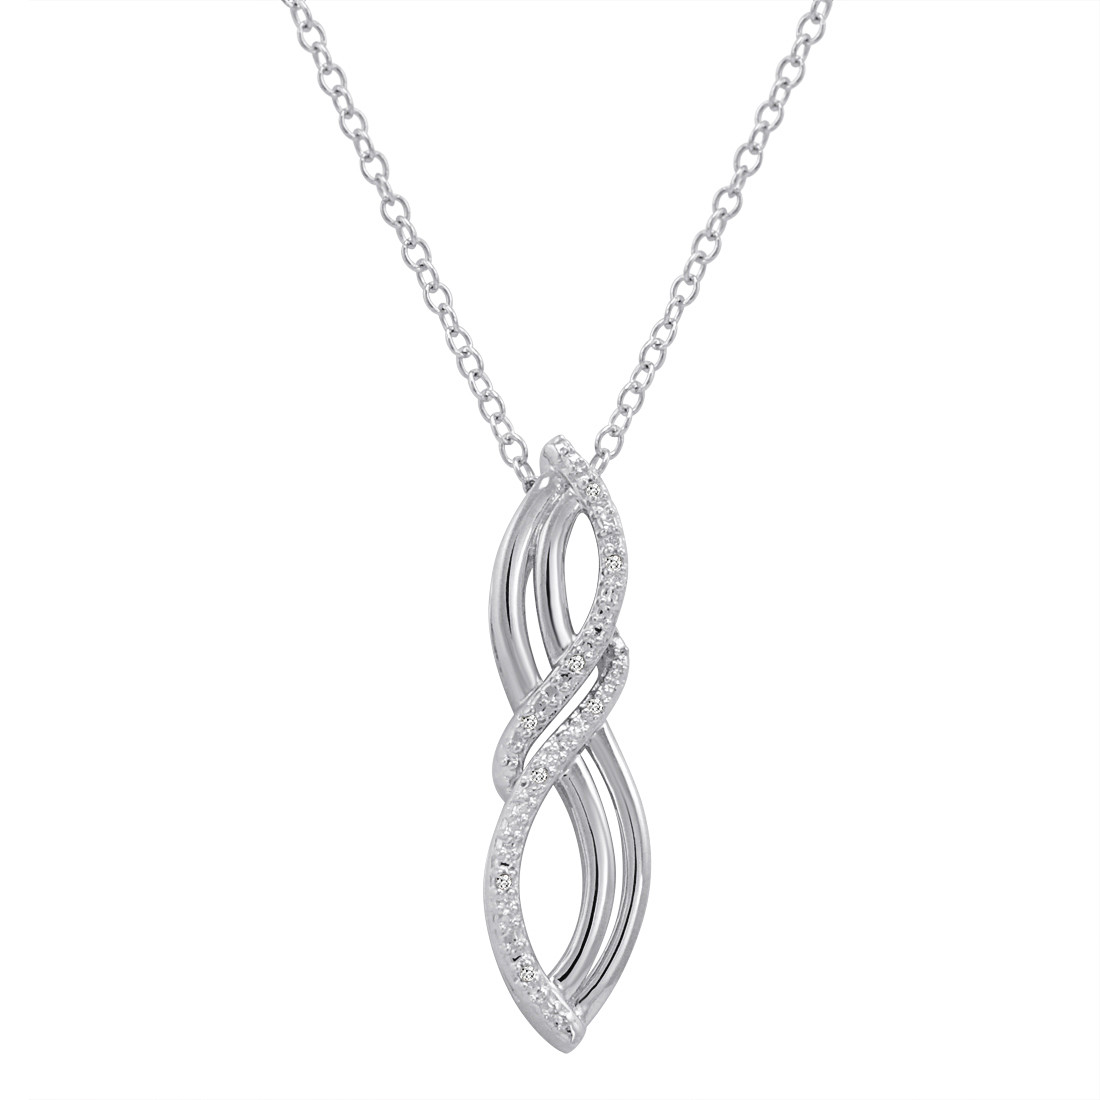 Sterling Silver Infinity Necklace
 Sterling Silver Natural Diamond Infinity Pendant Necklace